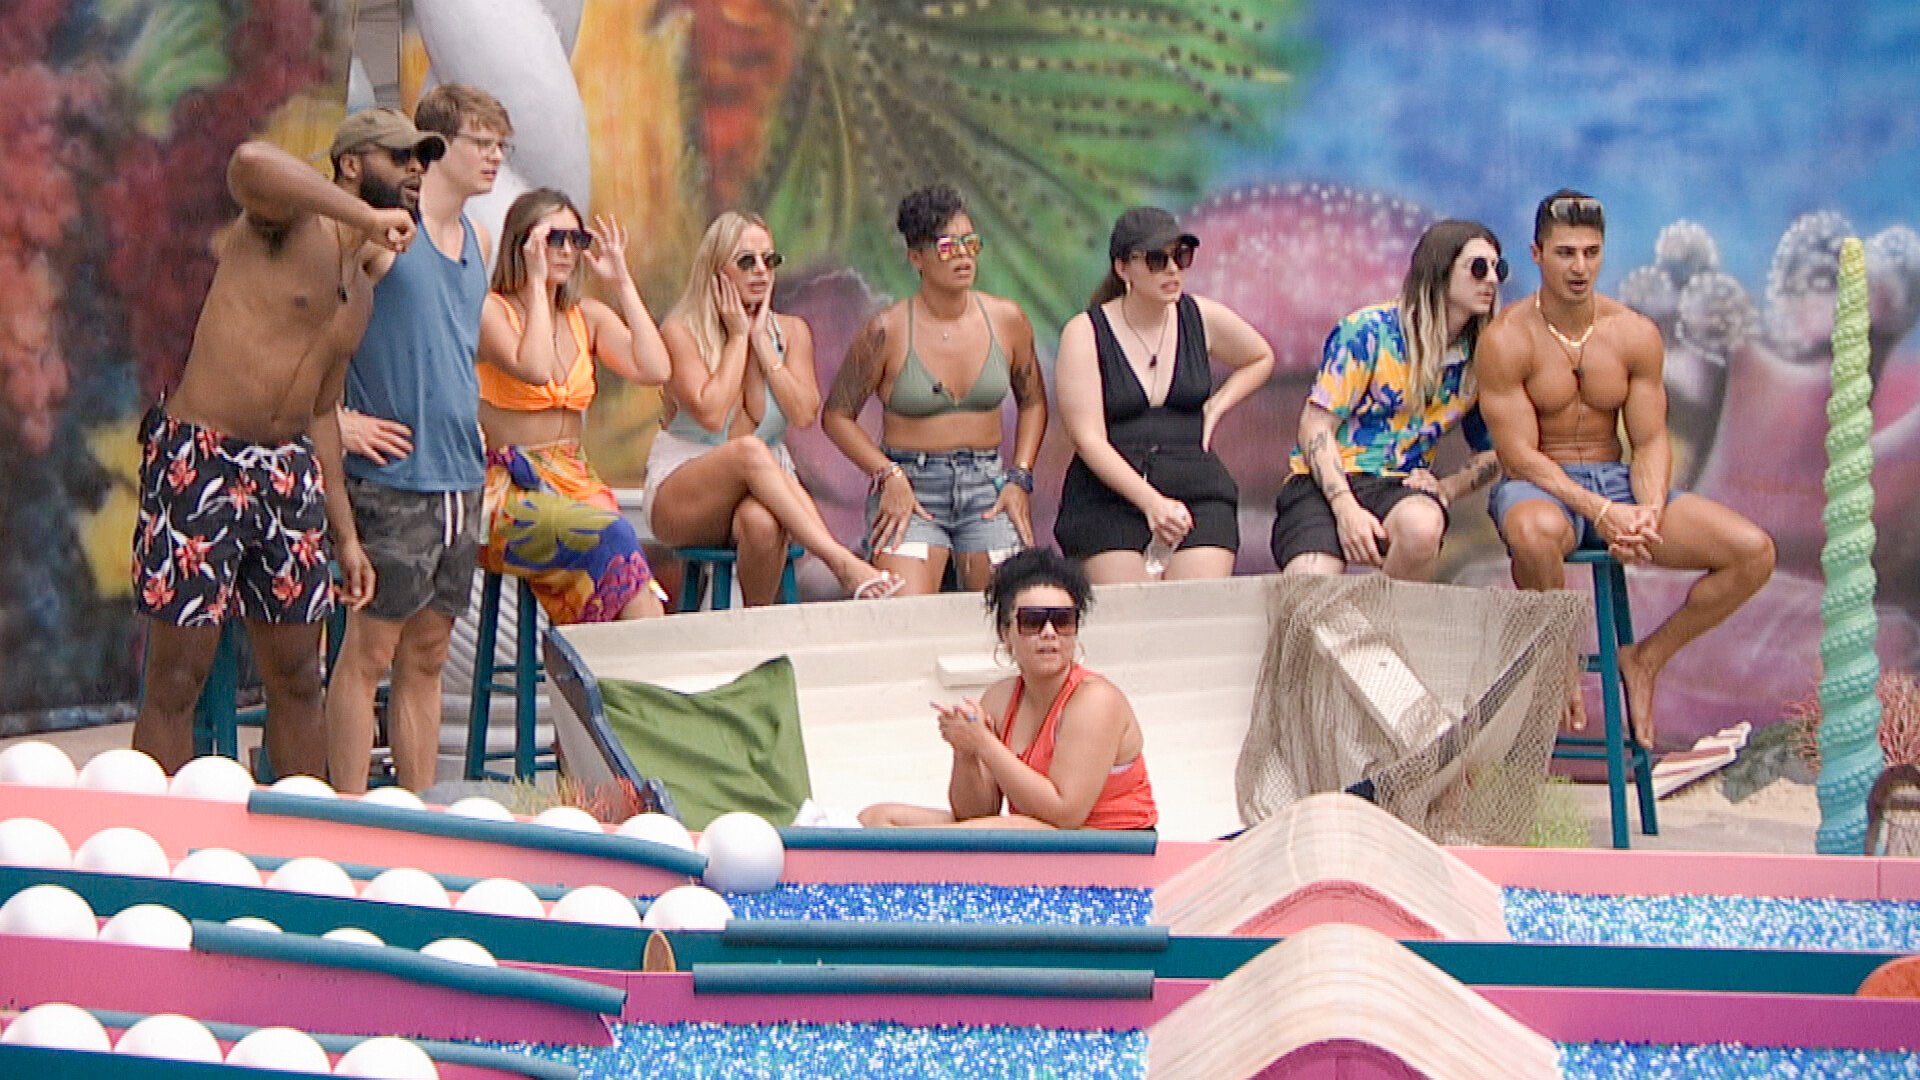 5 Shows Like ‘Big Brother’ to Watch Next